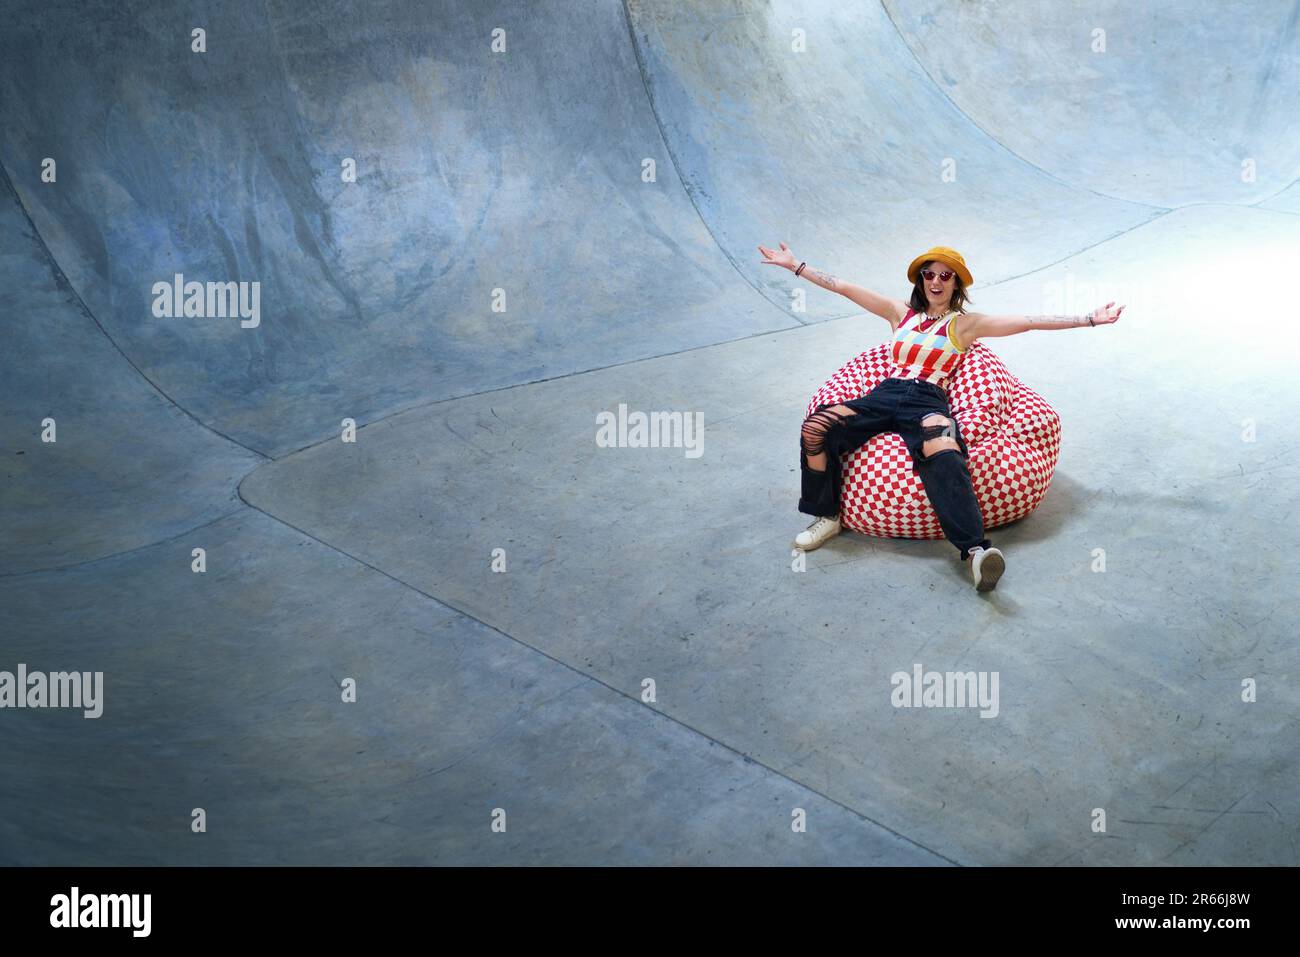 Portrait carefree young woman in beanbag chair on skate ramp Stock Photo